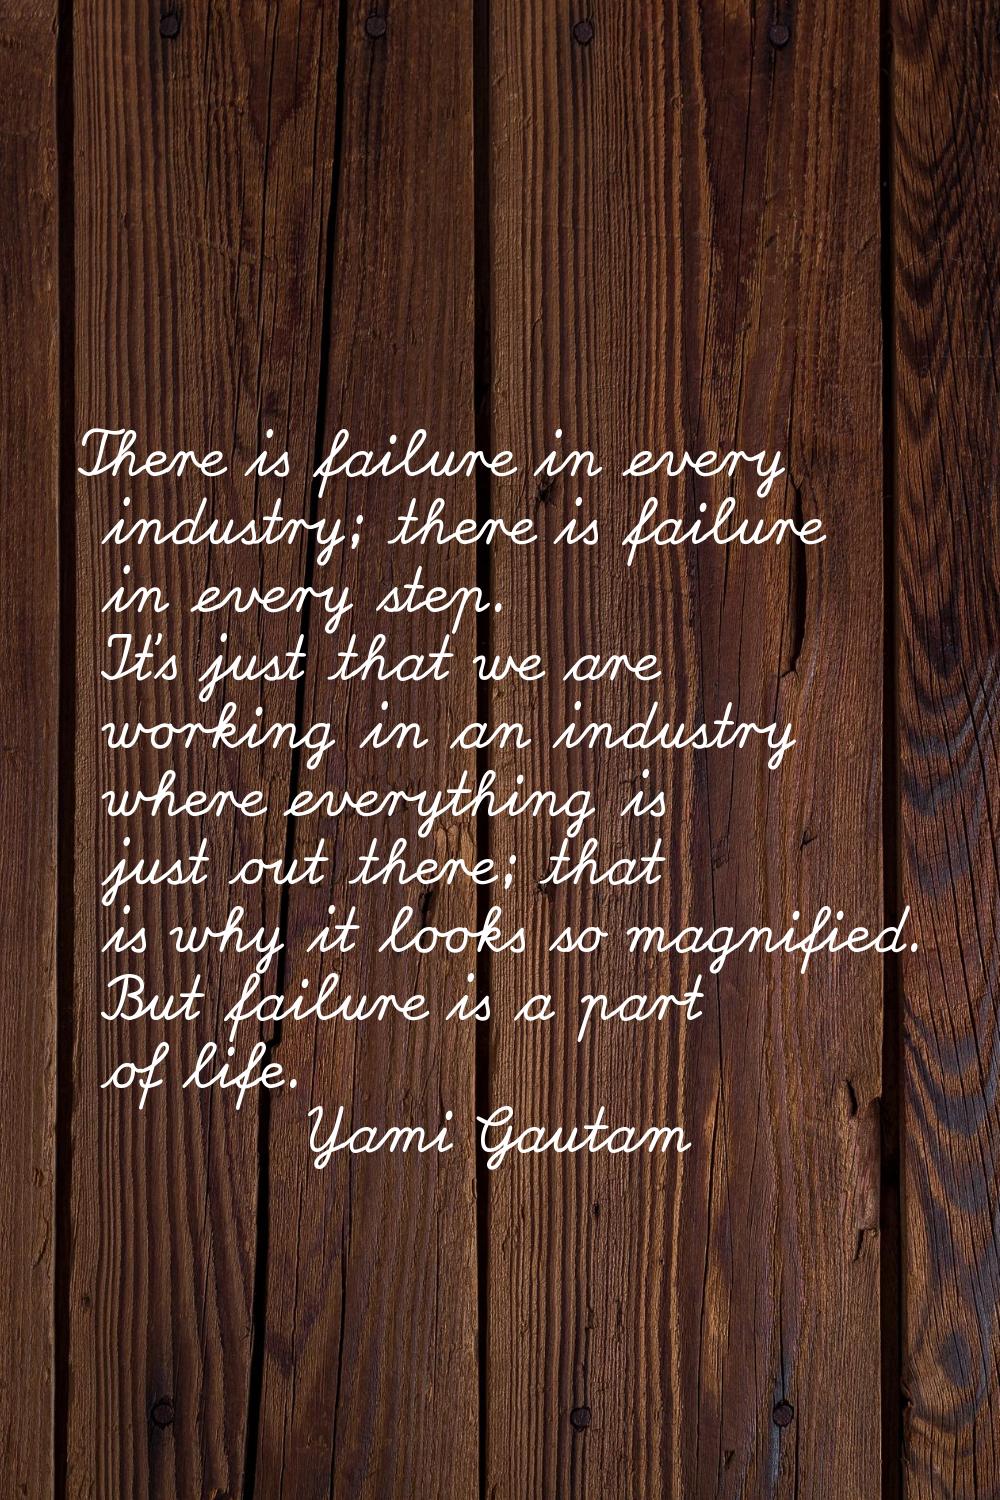 There is failure in every industry; there is failure in every step. It's just that we are working i